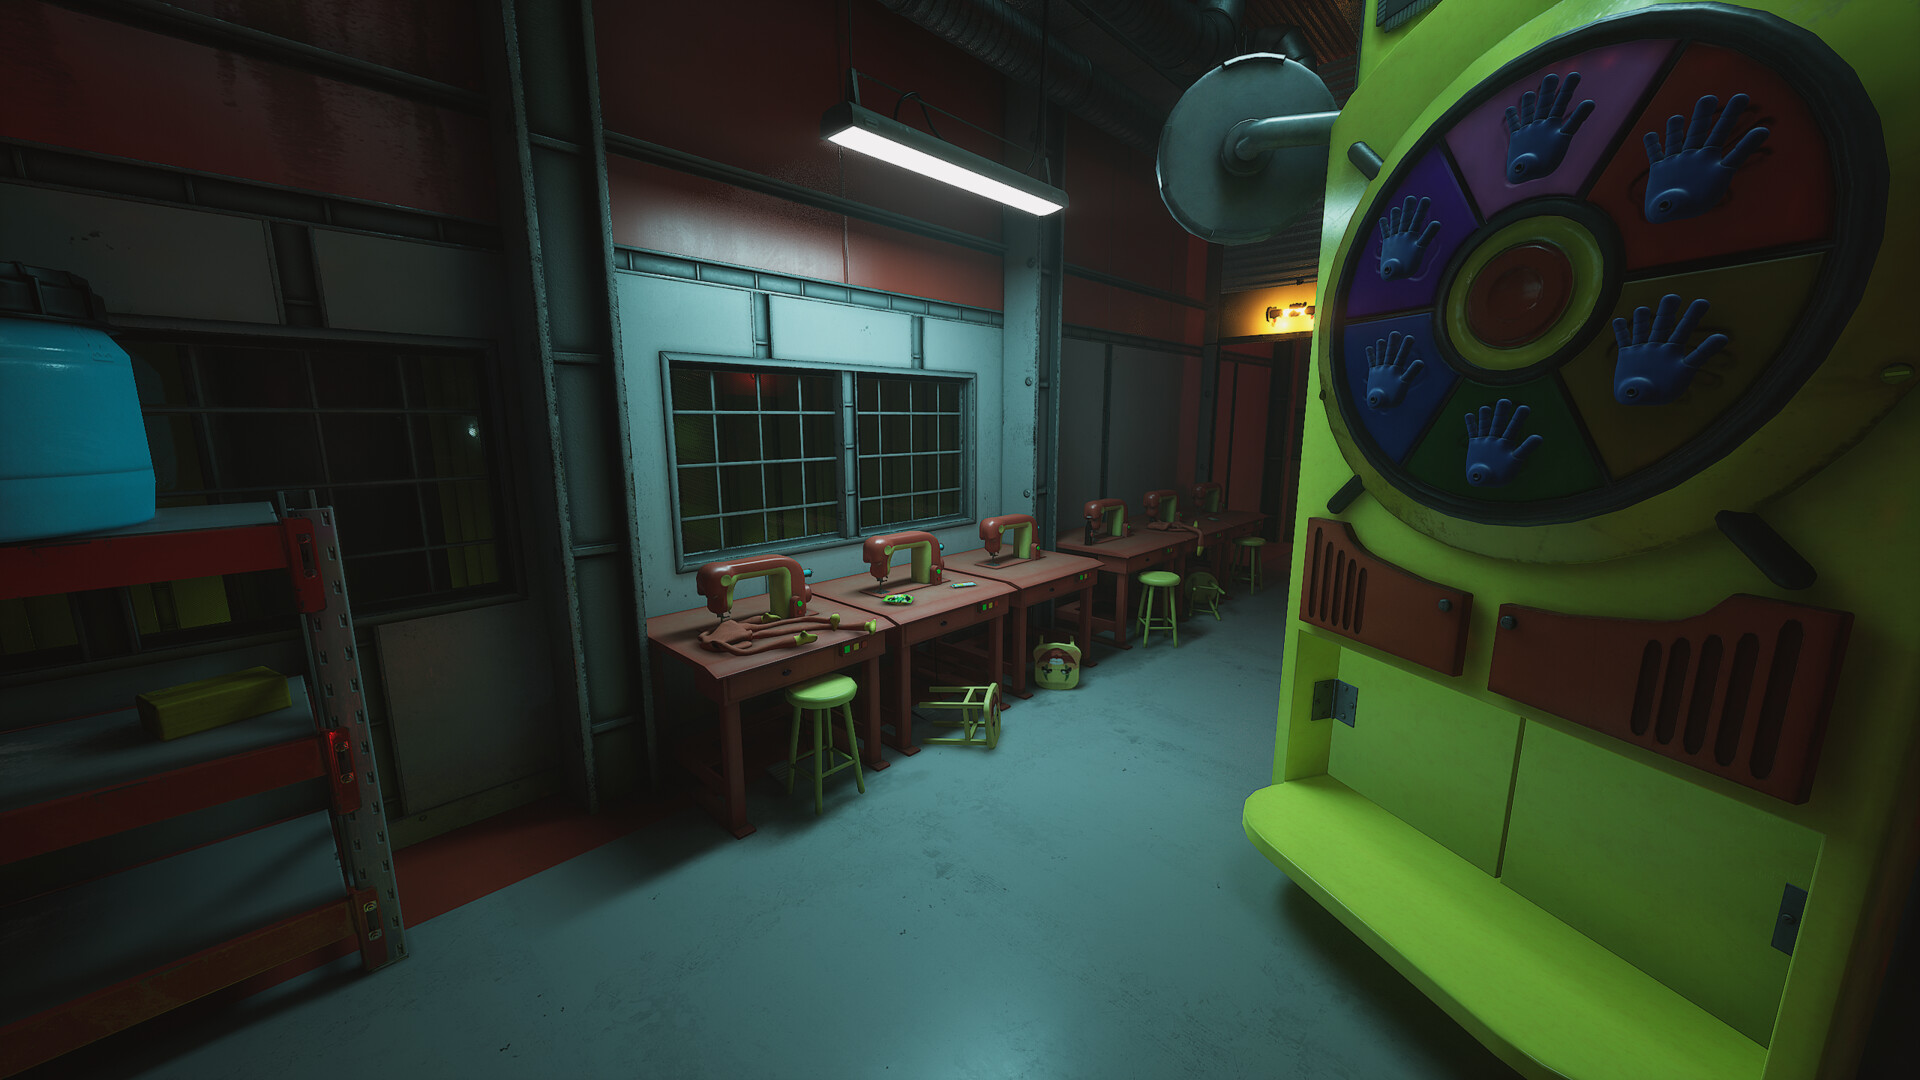 ArtStation - Port-A-Lounge Project Playtime